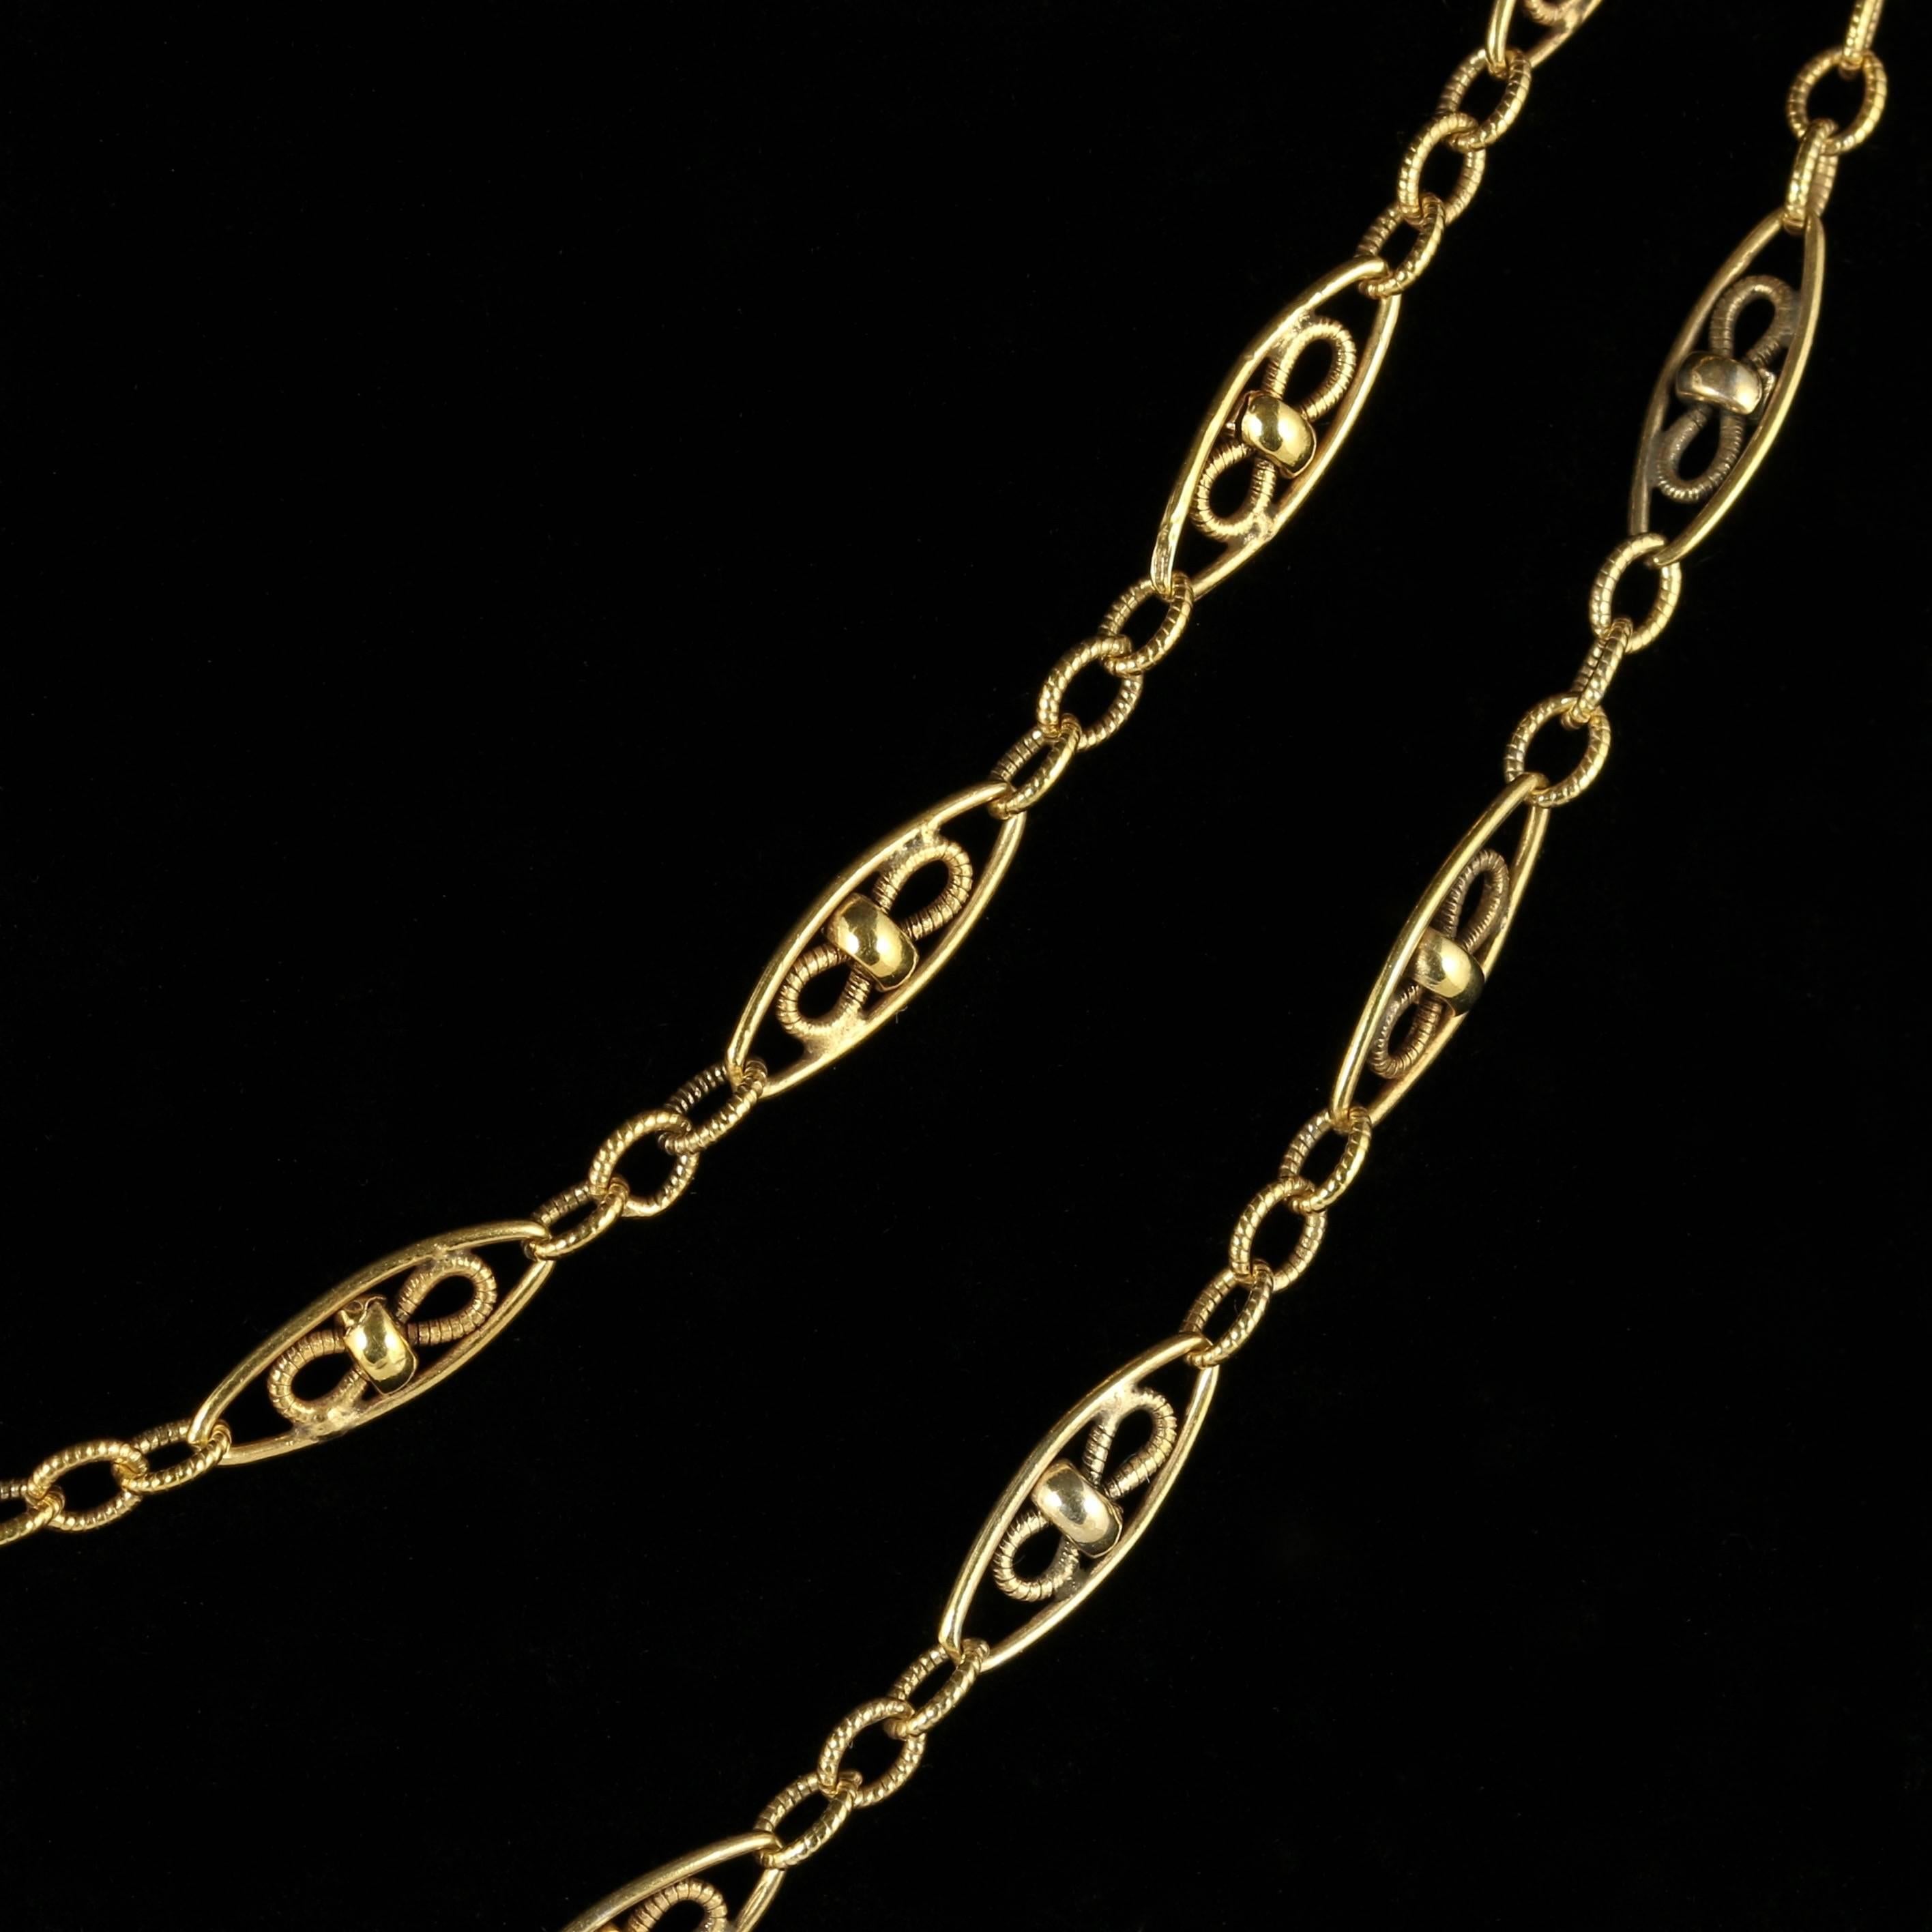 Antique Victorian Long Chain Sautoir 18 Carat on Silver, circa 1900 In Excellent Condition For Sale In Lancaster, Lancashire